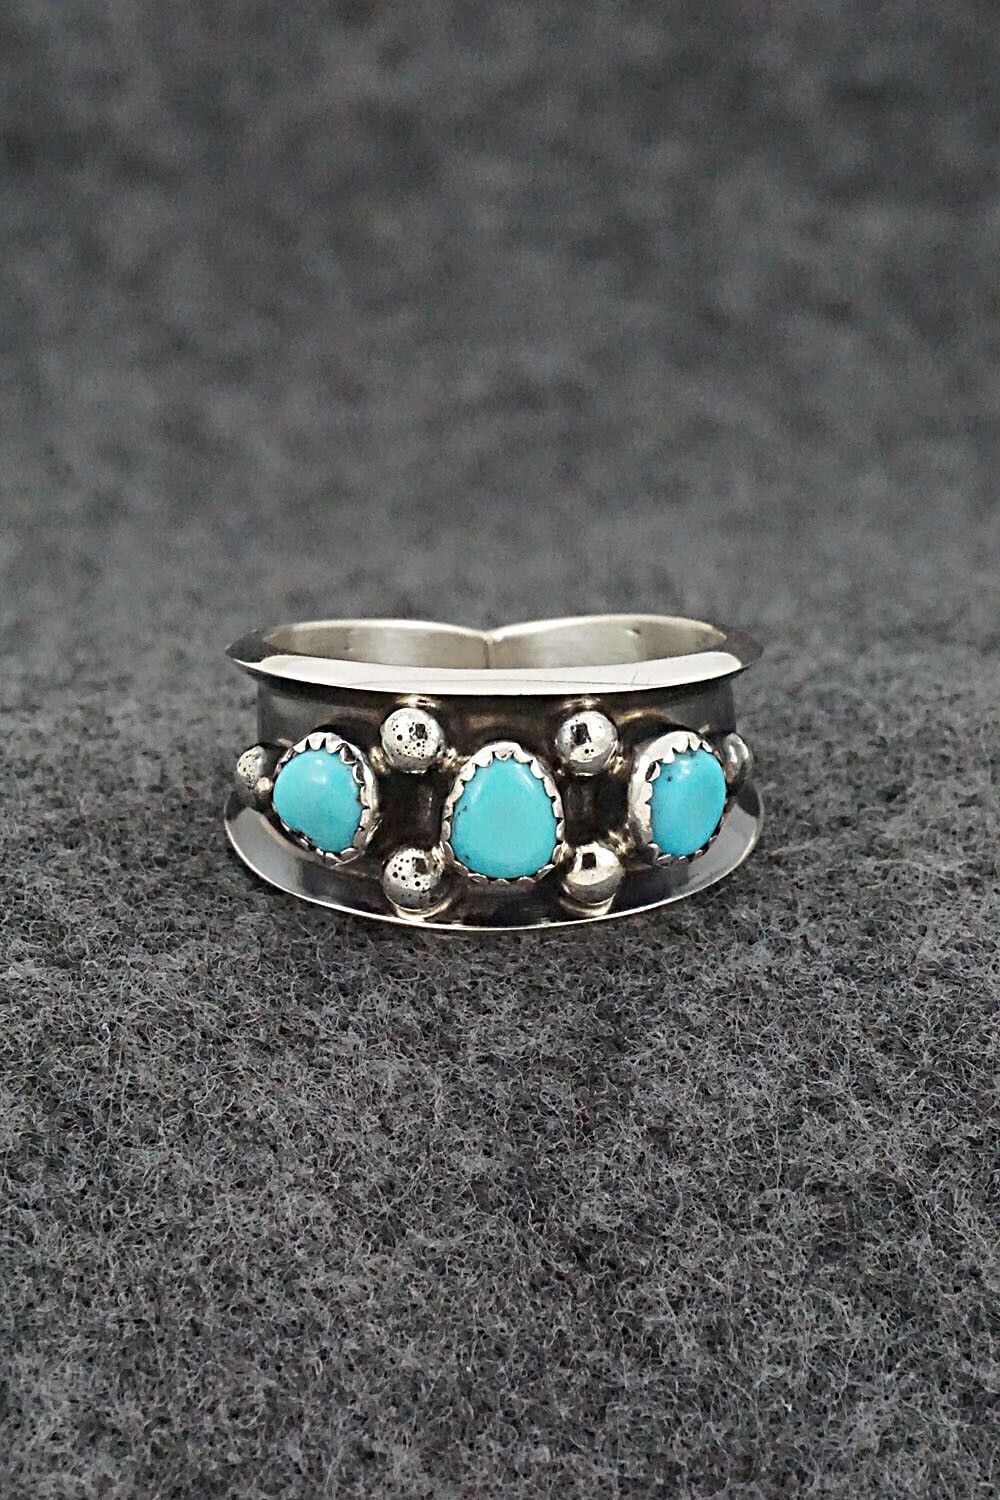 Turquoise & Sterling Silver Ring - Paul Largo - Size 9.25